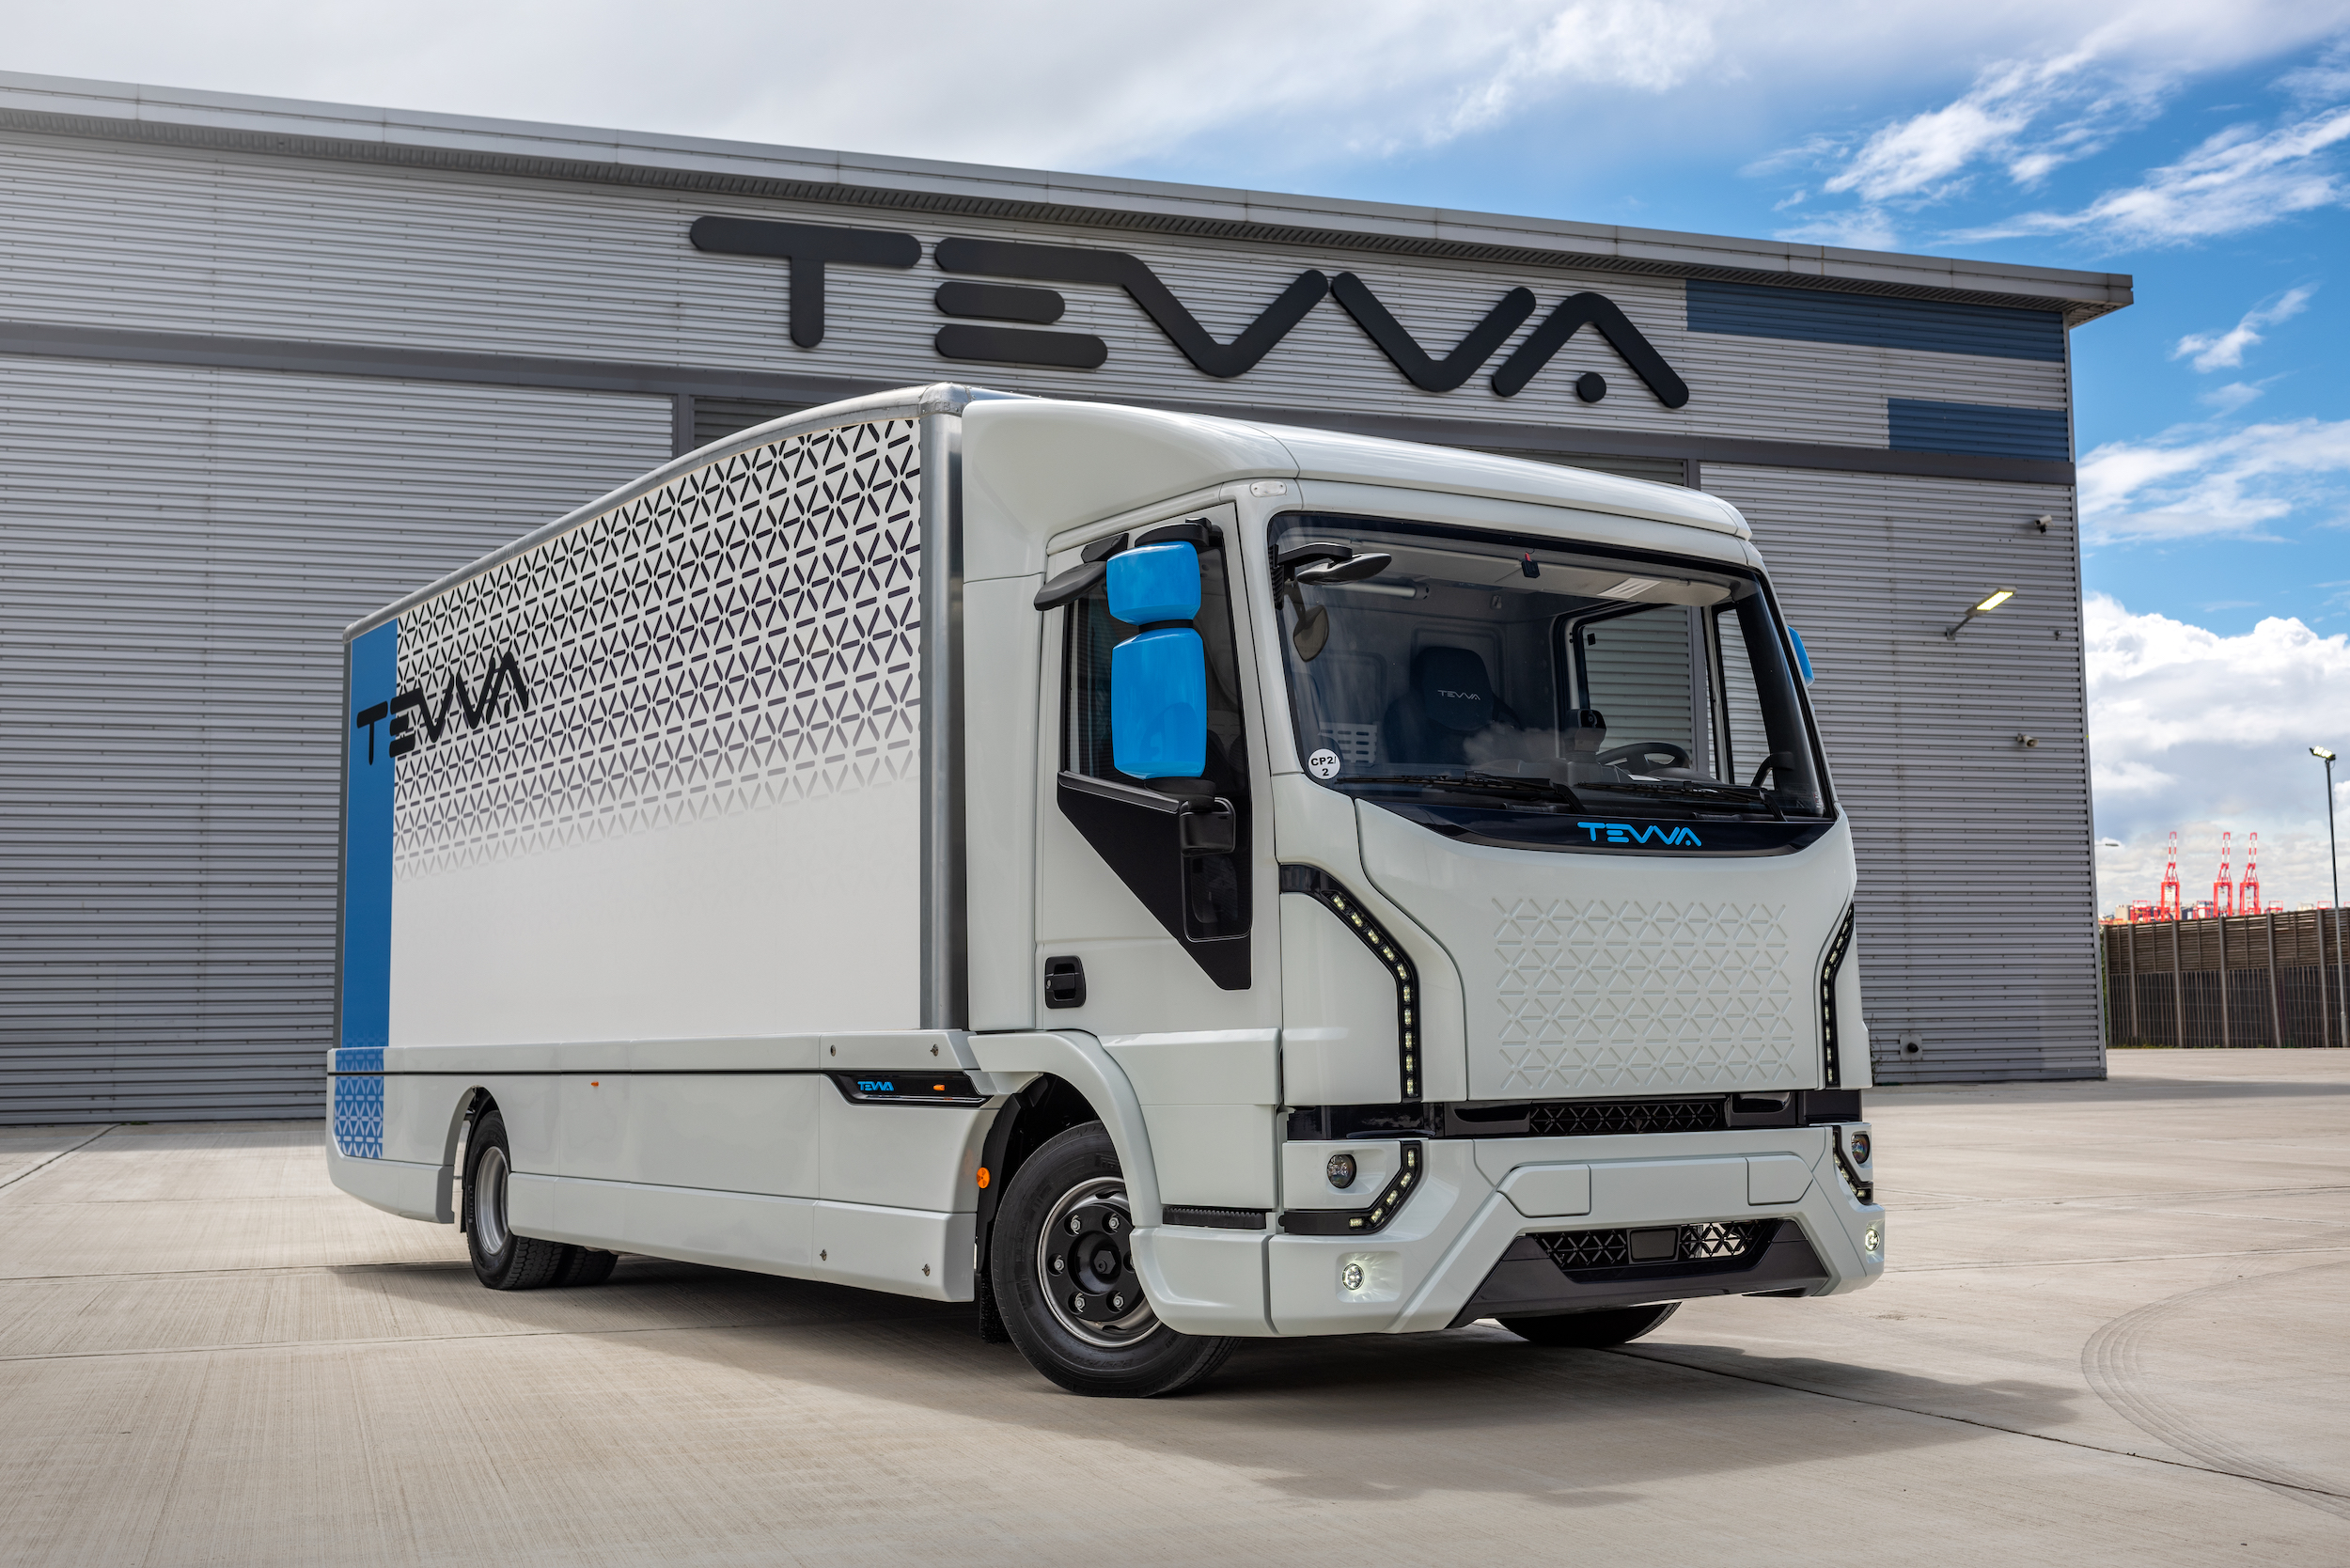 Tevva set for Mass Production After Receiving Whole Vehicle Type Approval